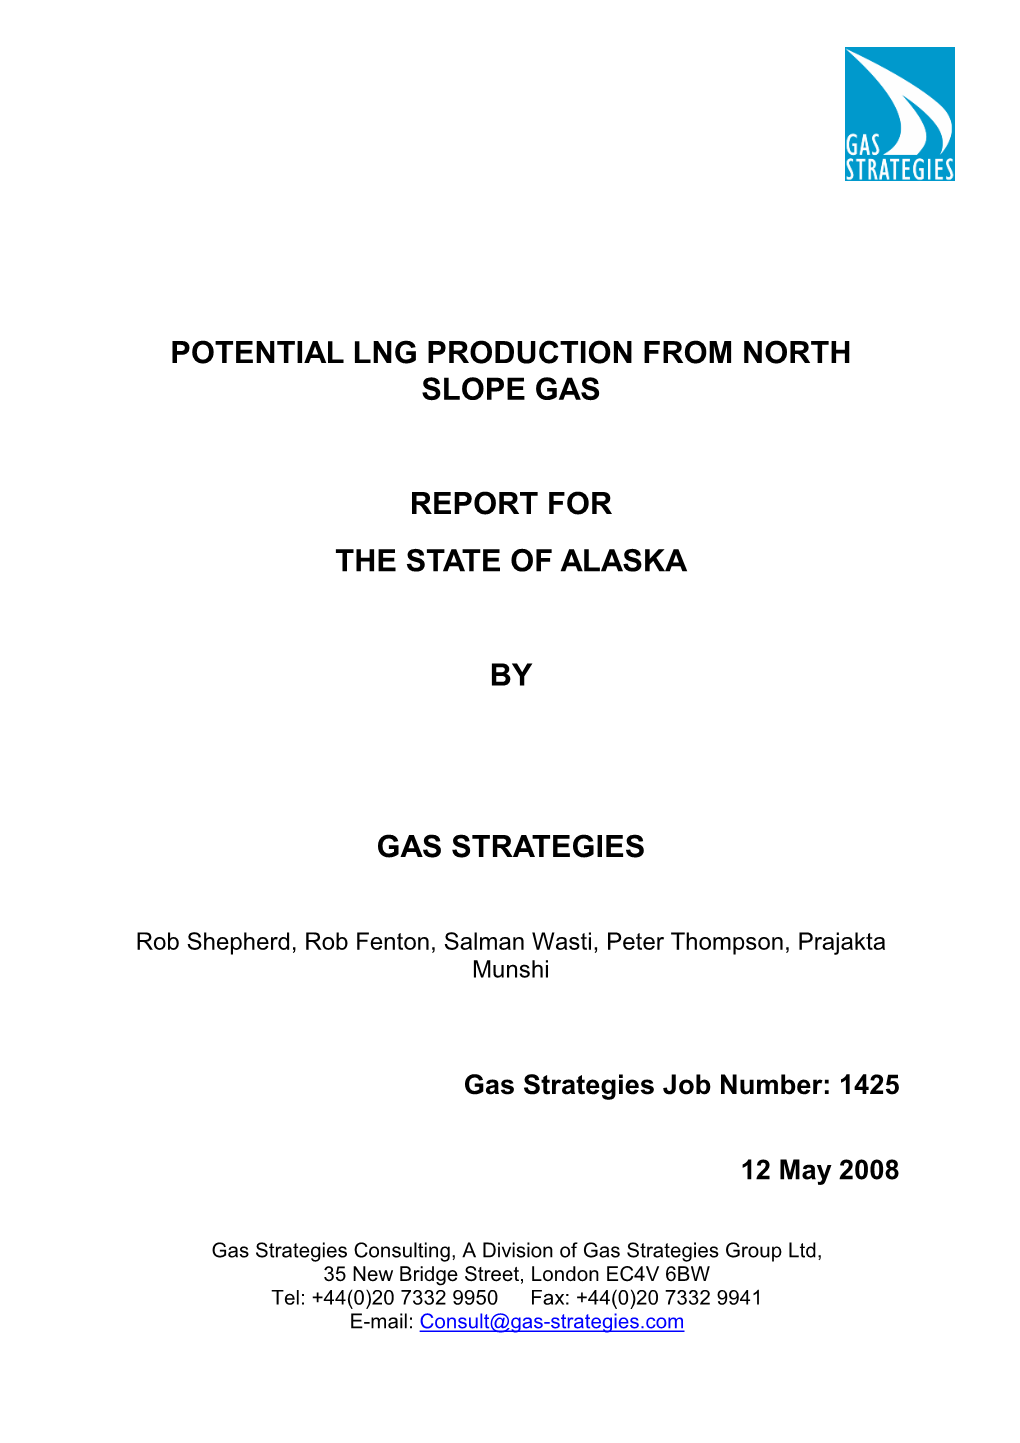 Report for the State of Alaska by Gas Strategies